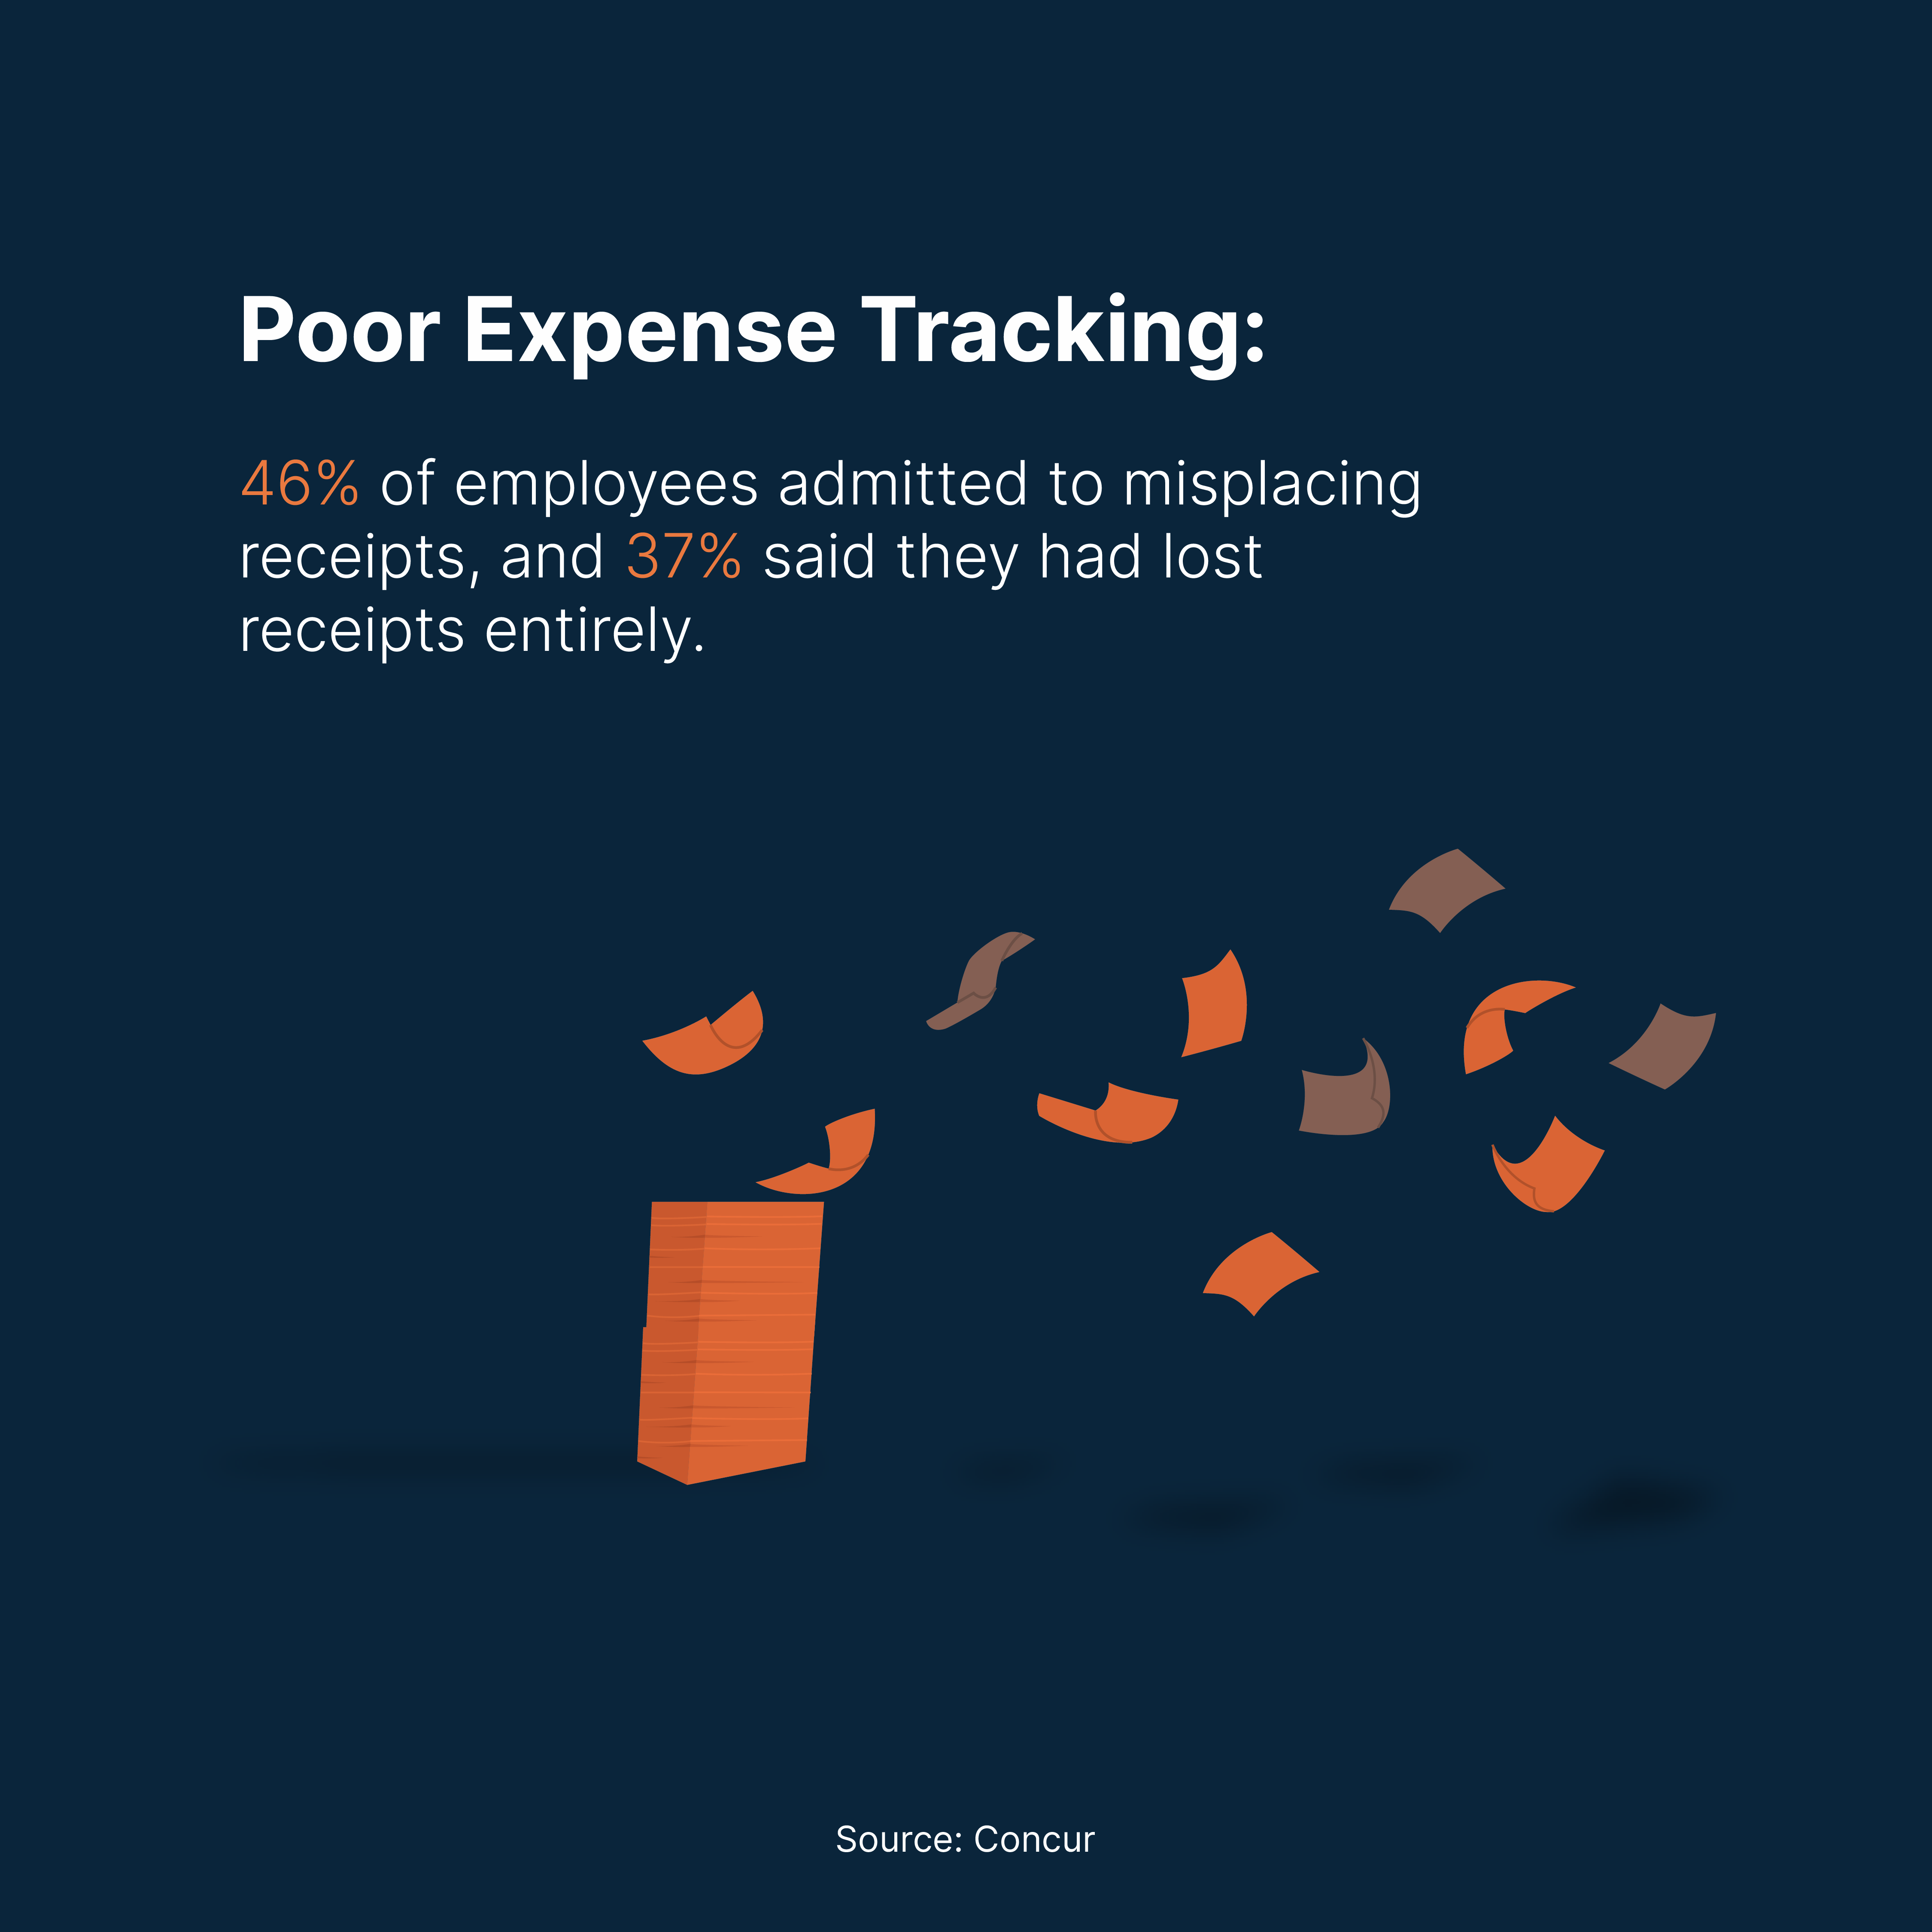 Poor expense tracking